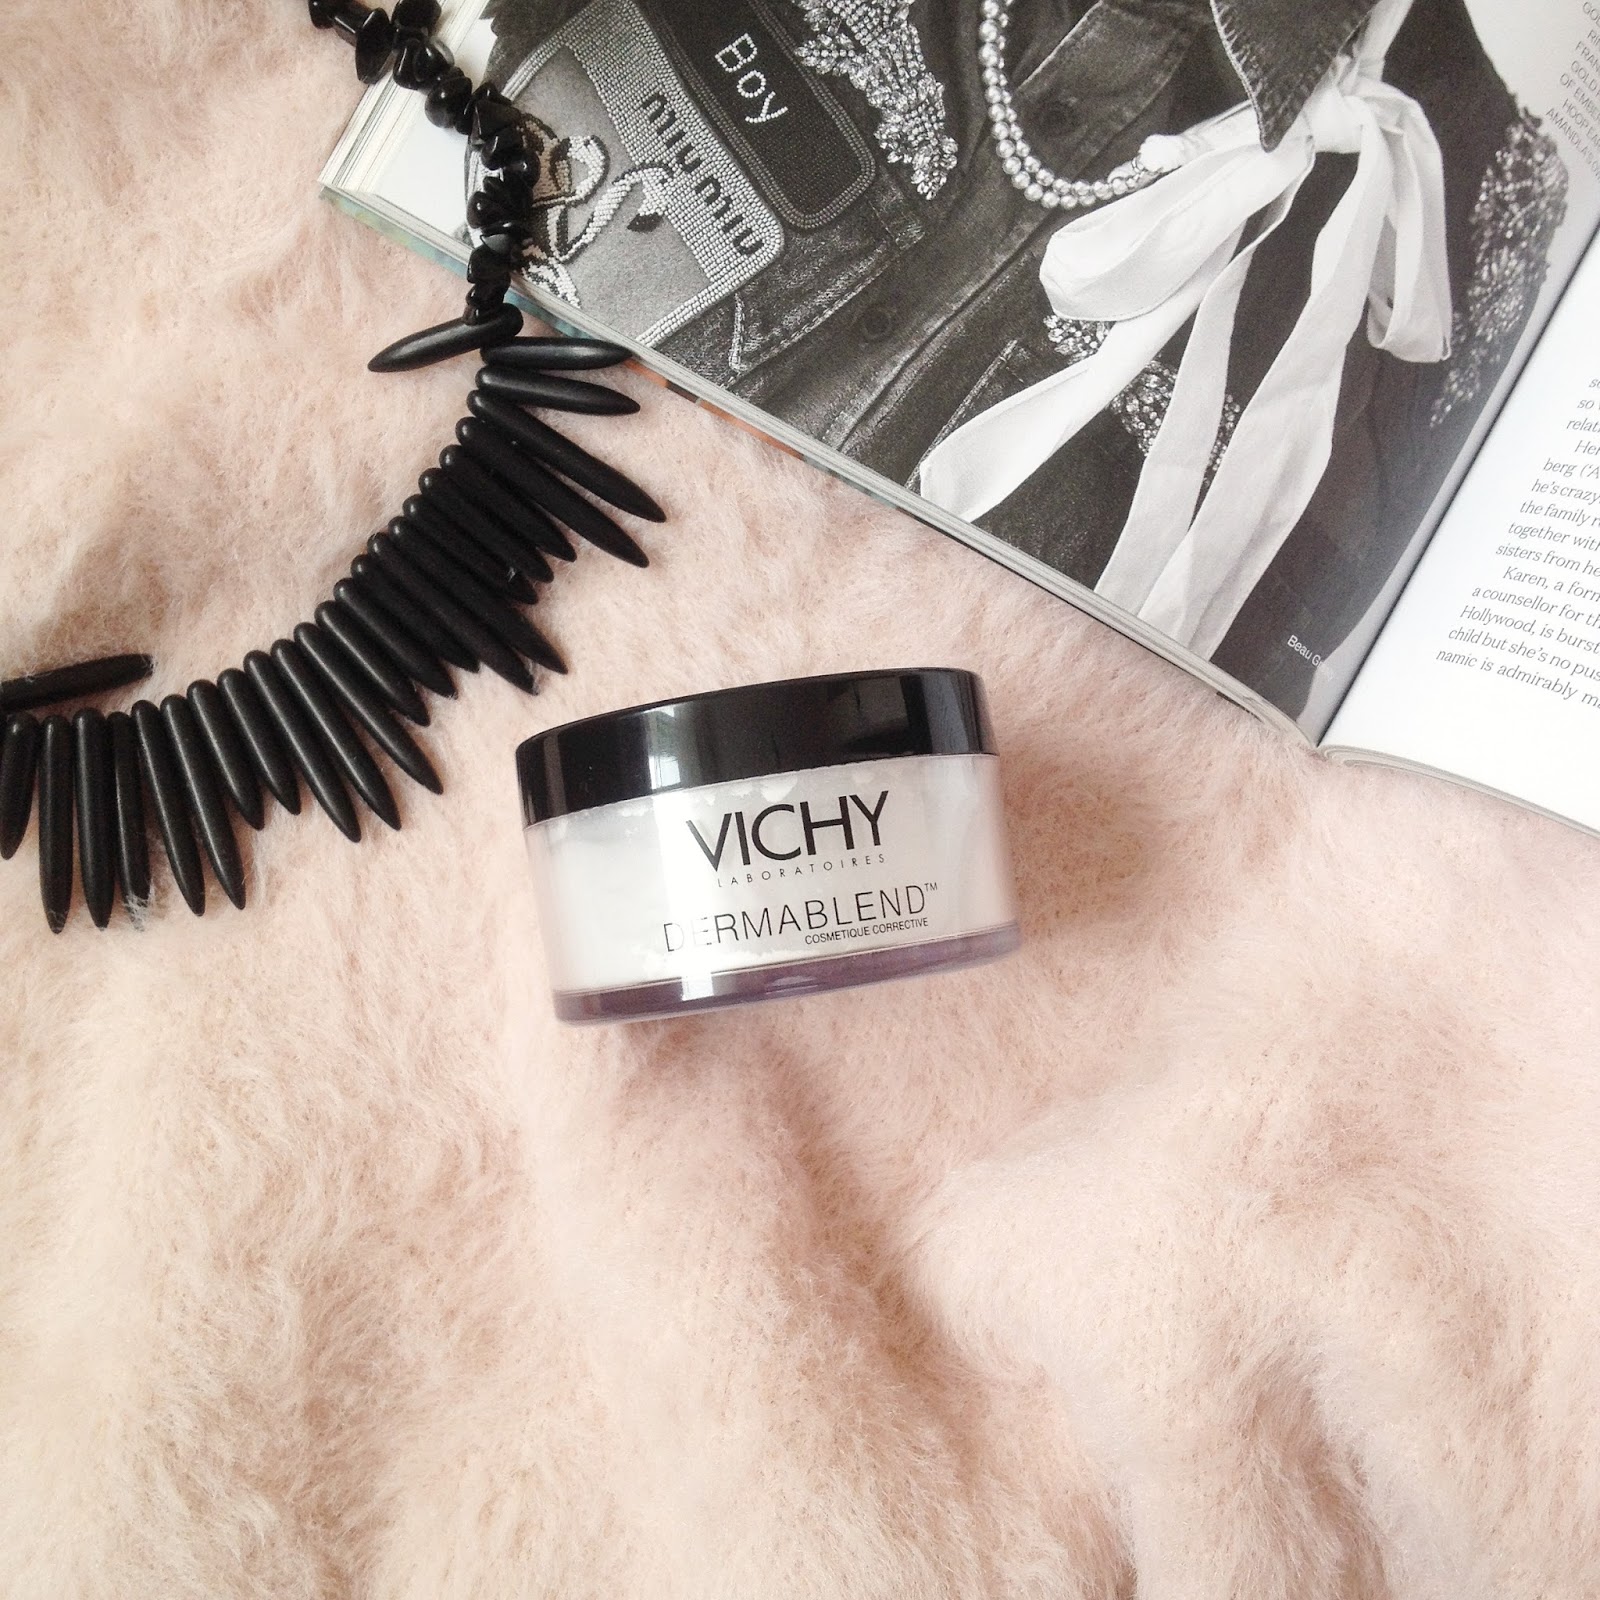 vichy demablend puder